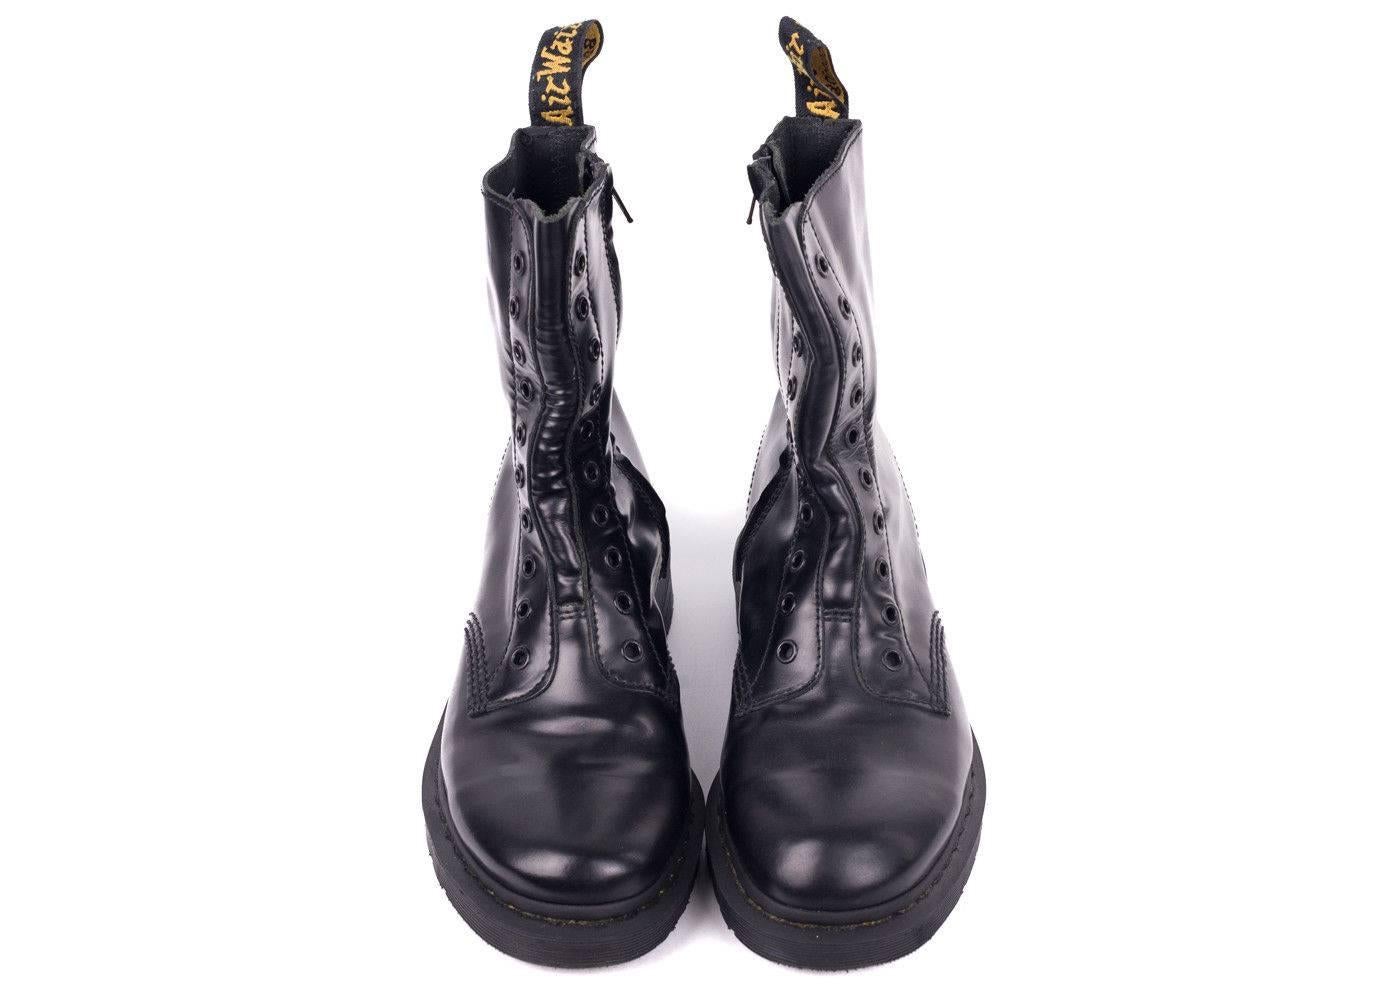 Roll up your denim and throw on your leather jacket with your Limited Edition Dr. Marten Boots. This high shine combat boot features the impeccable Air Wair Soles, Shoe String Free , and 'Borderline' Logo stamped heels. Showcase your special edition